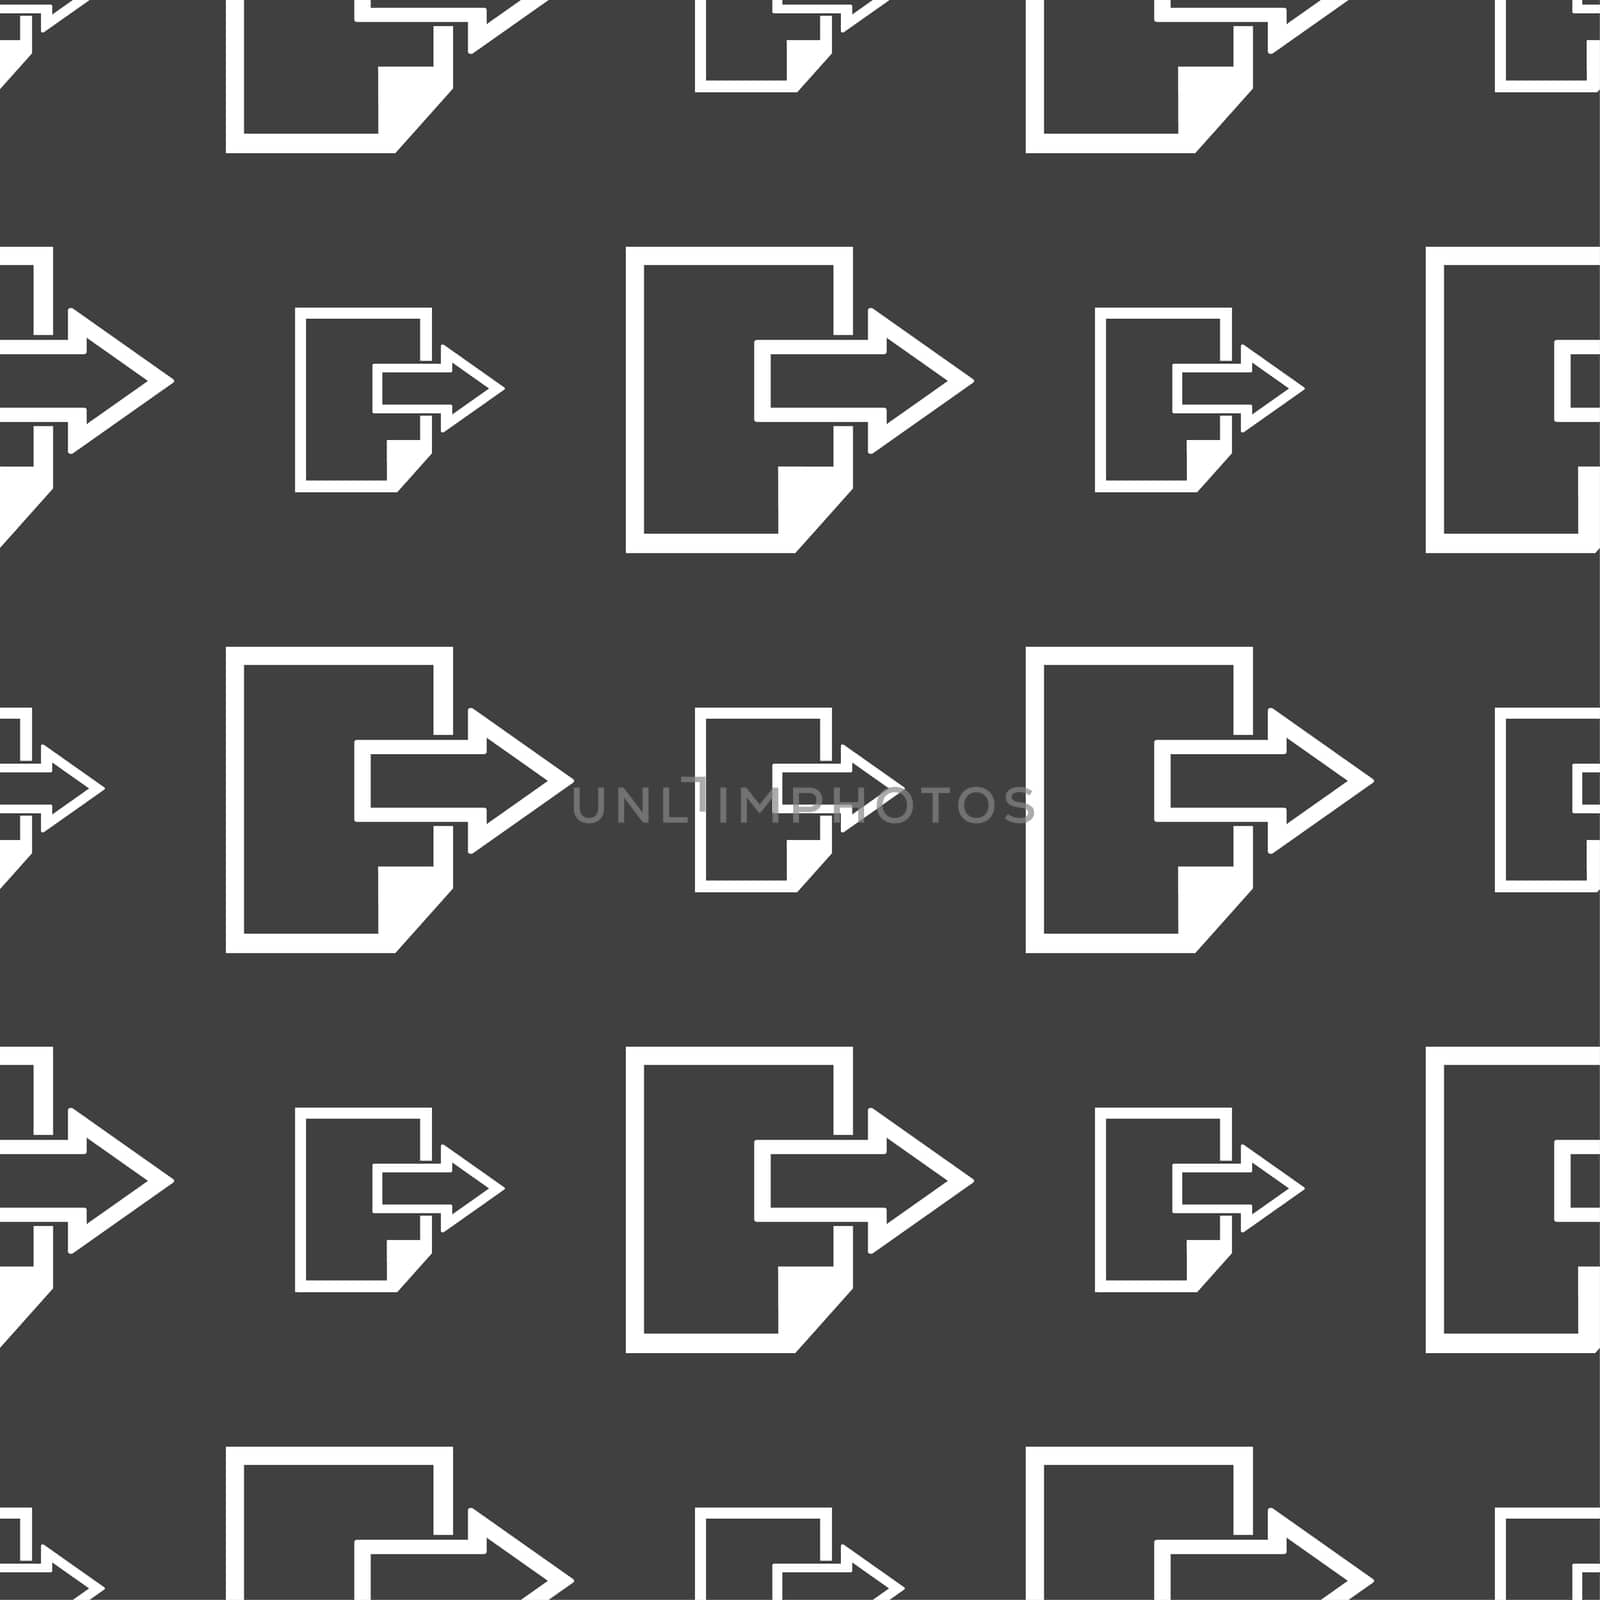 Export file icon. File document symbol. Seamless pattern on a gray background. illustration